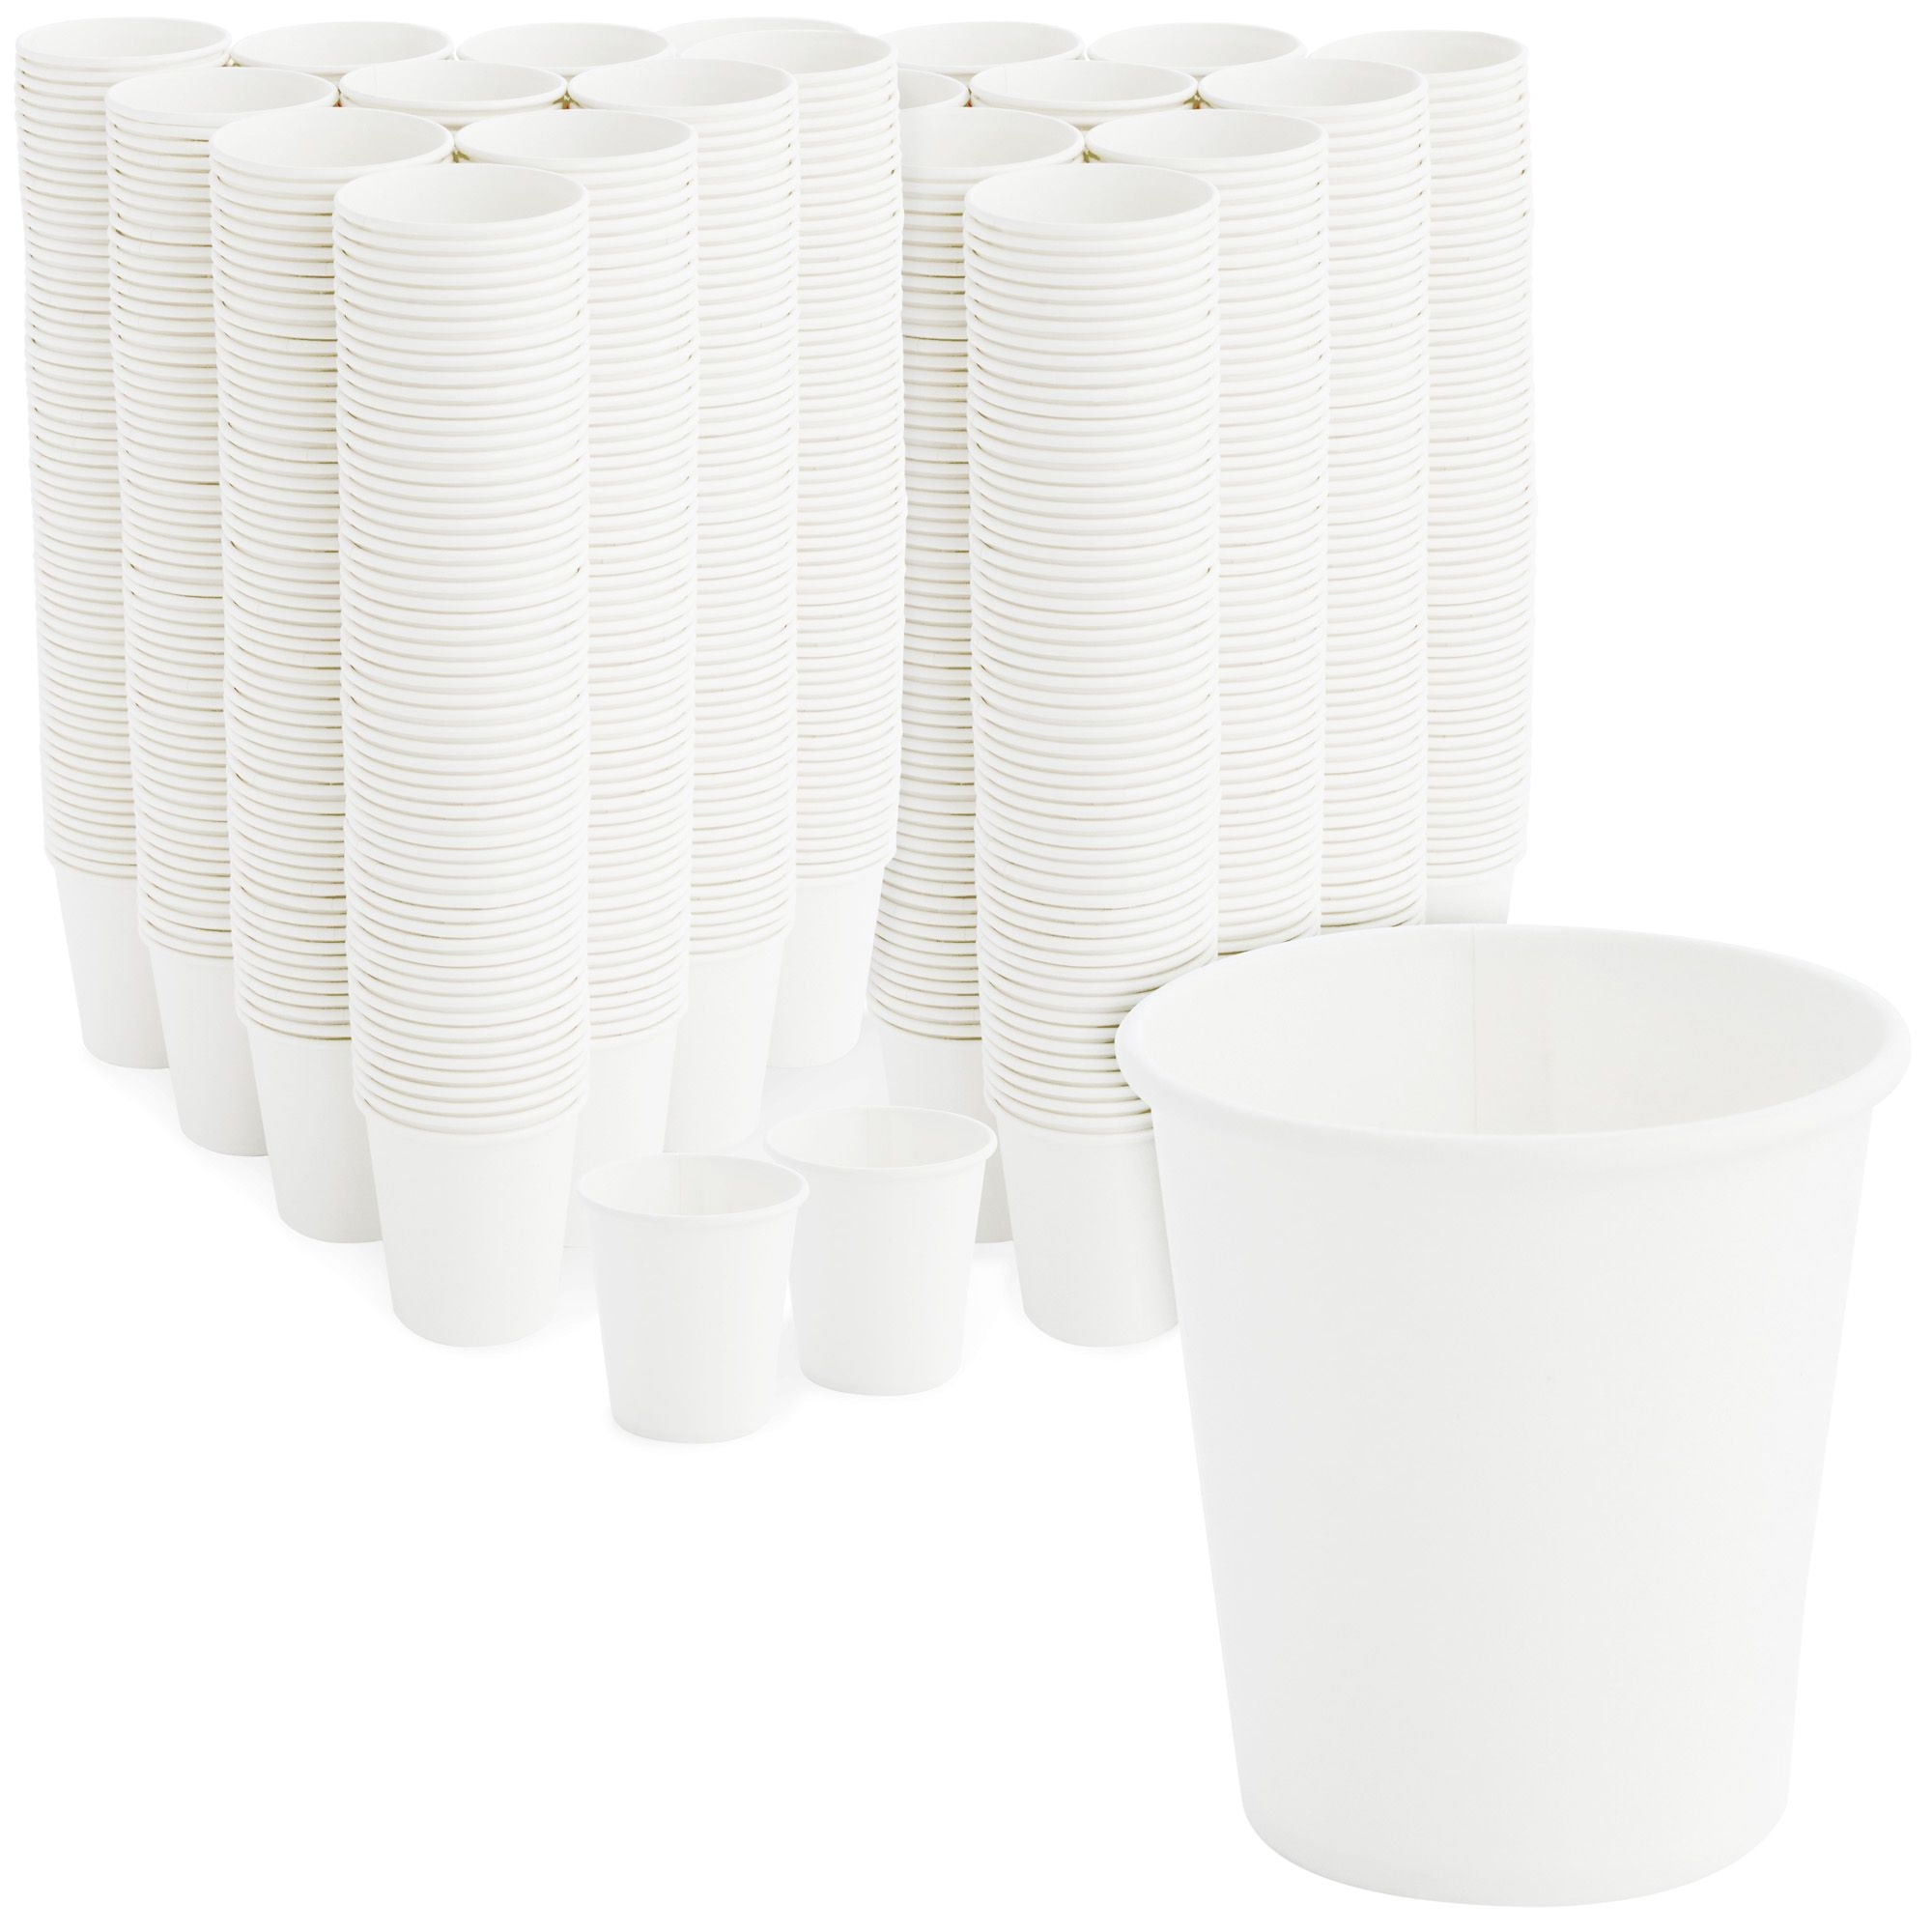 Comfy Package Small Paper Cups 3 Oz Blue Disposable Cups for Espresso,  Medicine, 300-Pack